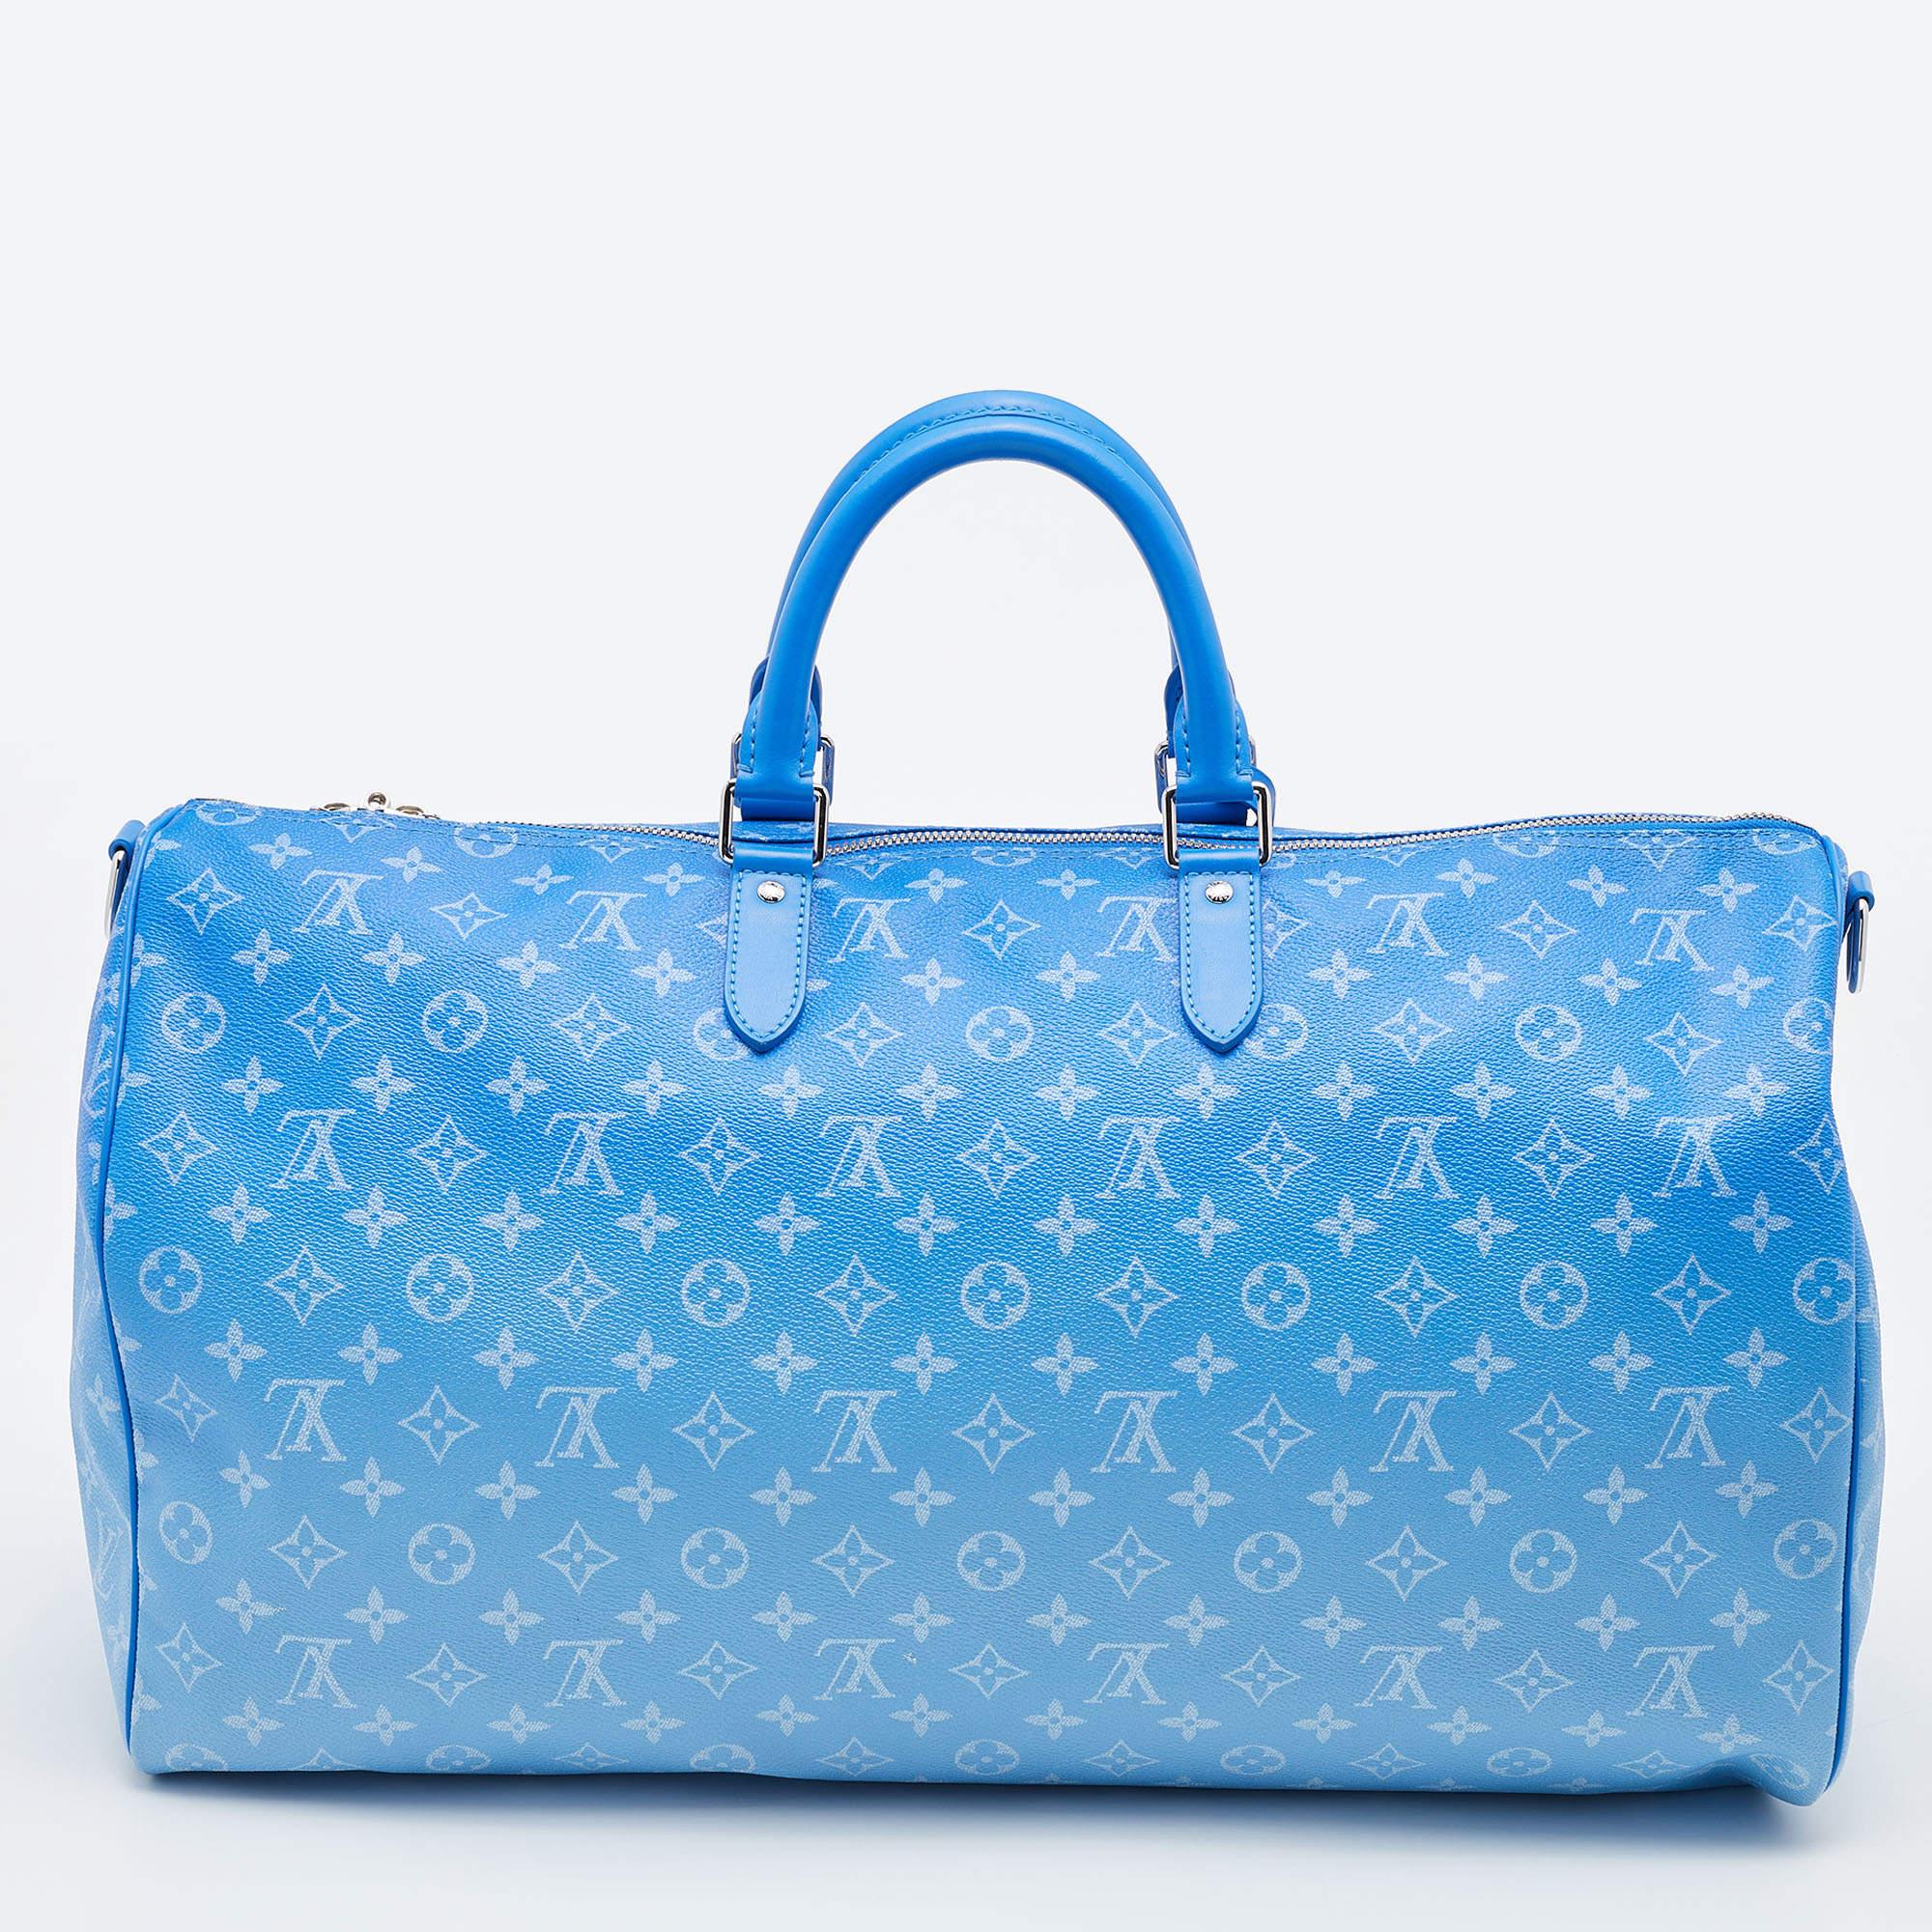 Louis Vuitton Cloud Collection! Keepall 50, slender wallet, and